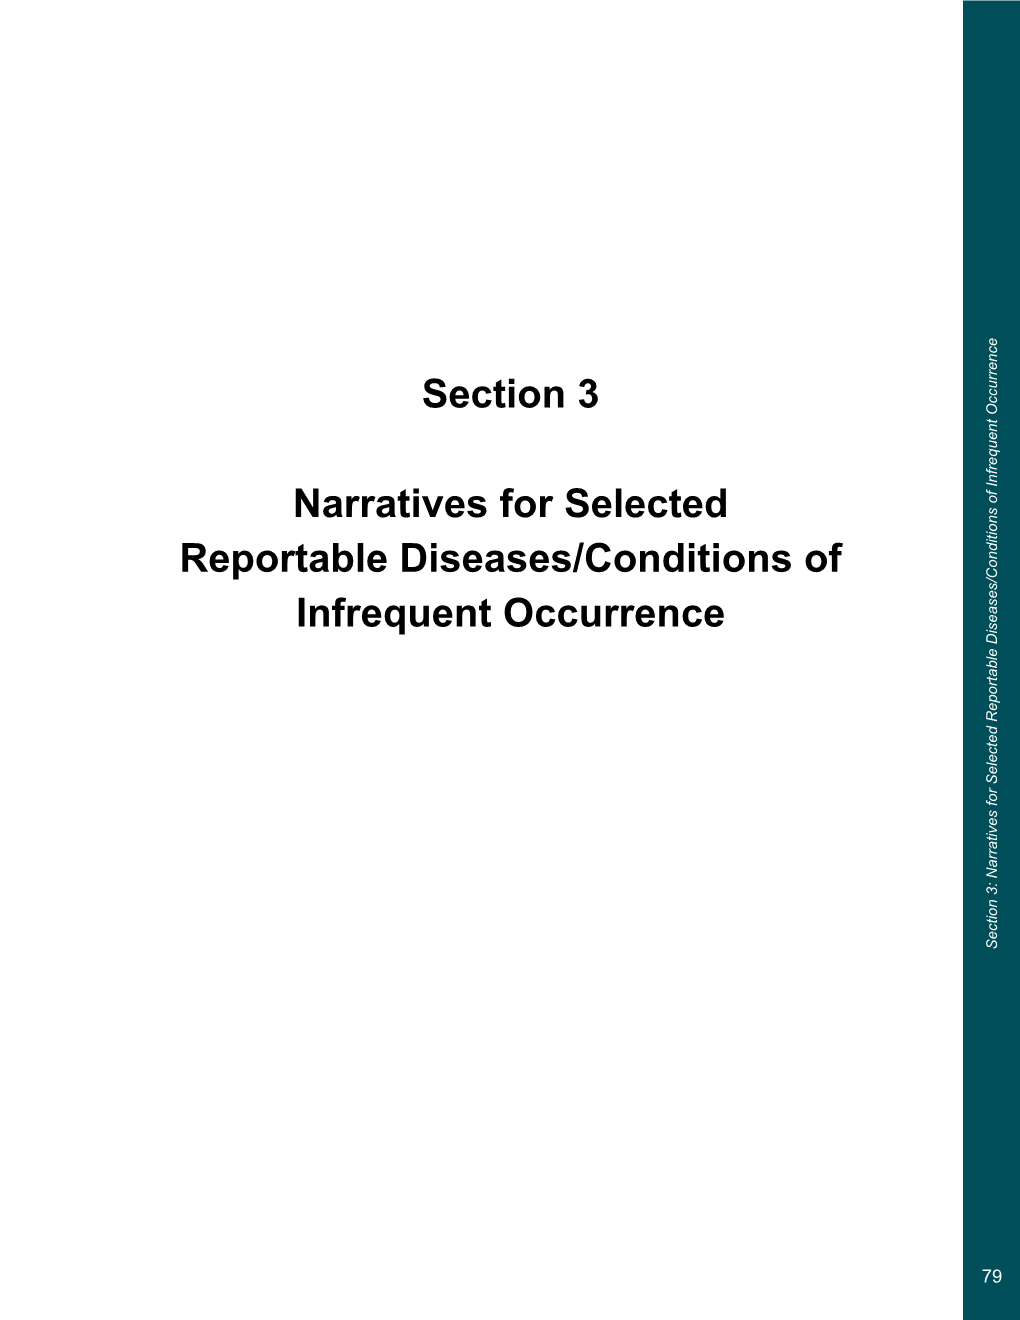 Section 3 Narratives for Selected Reportable Diseases/Conditions Of